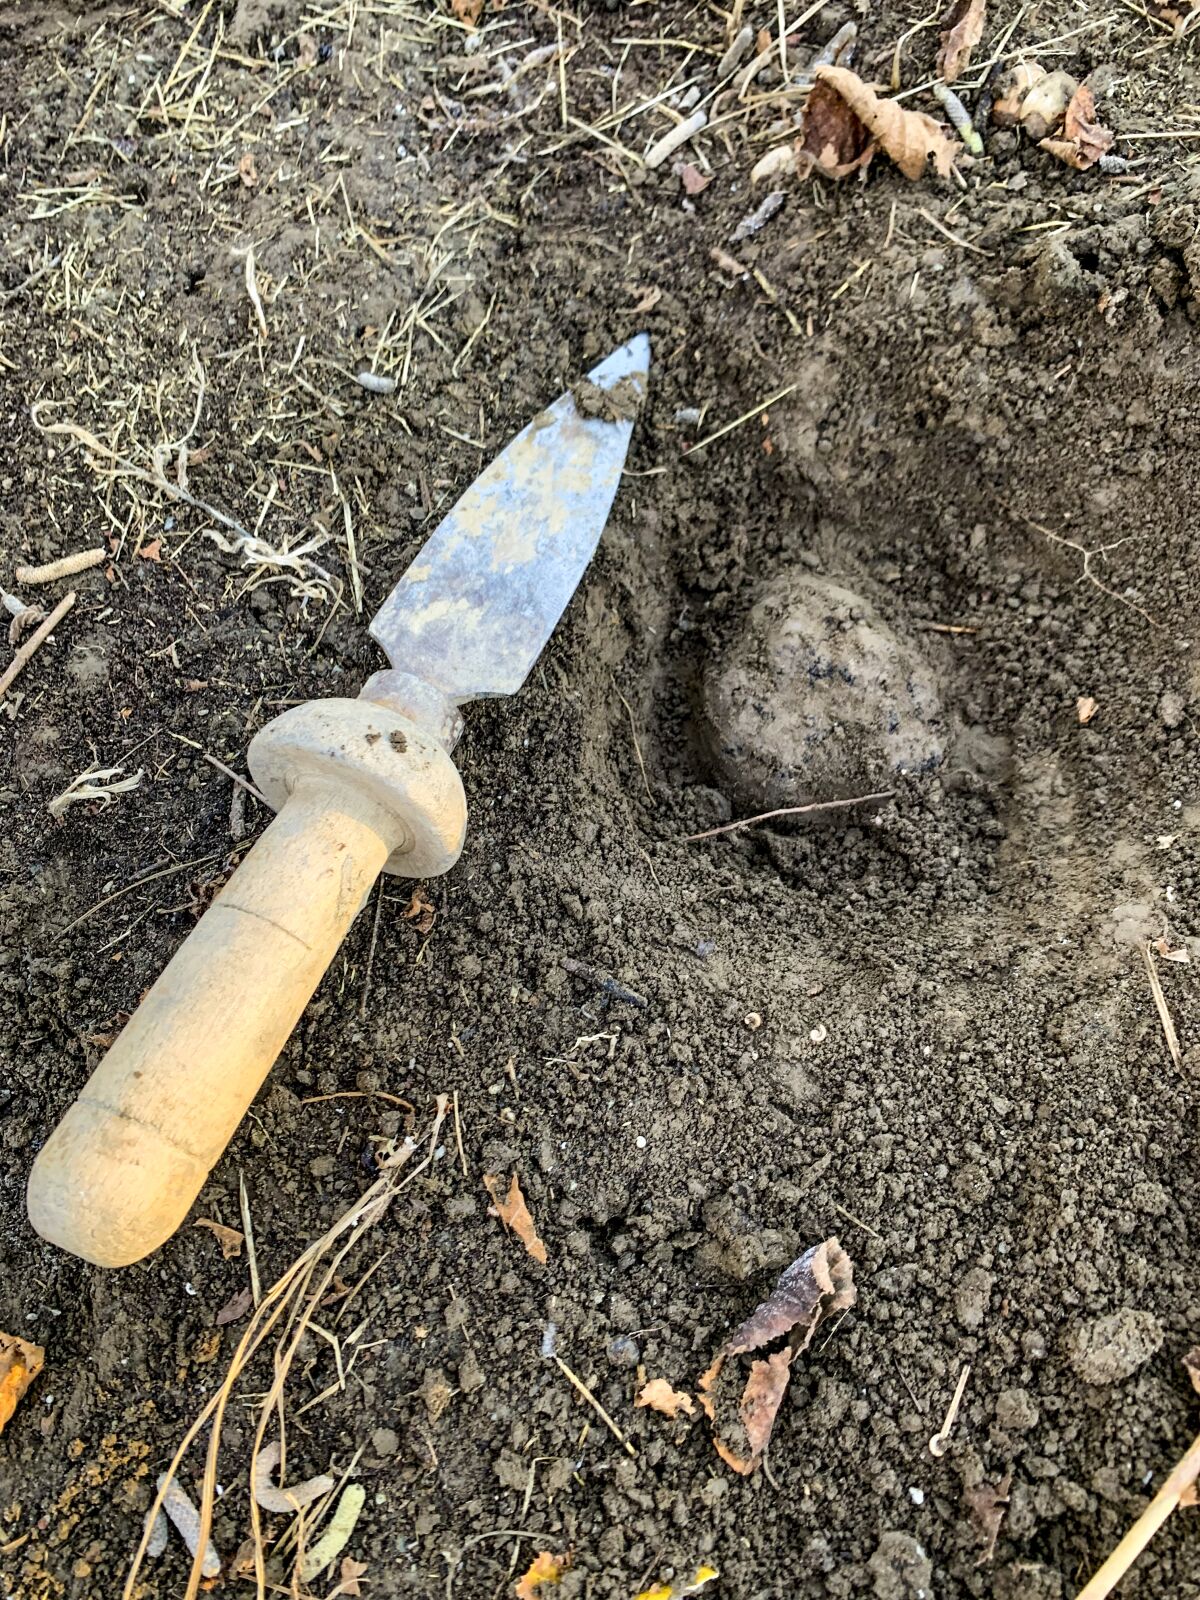 A digging tool lies next to the truffle, still in the dirt, after Seth and Leo found it in the orchard.